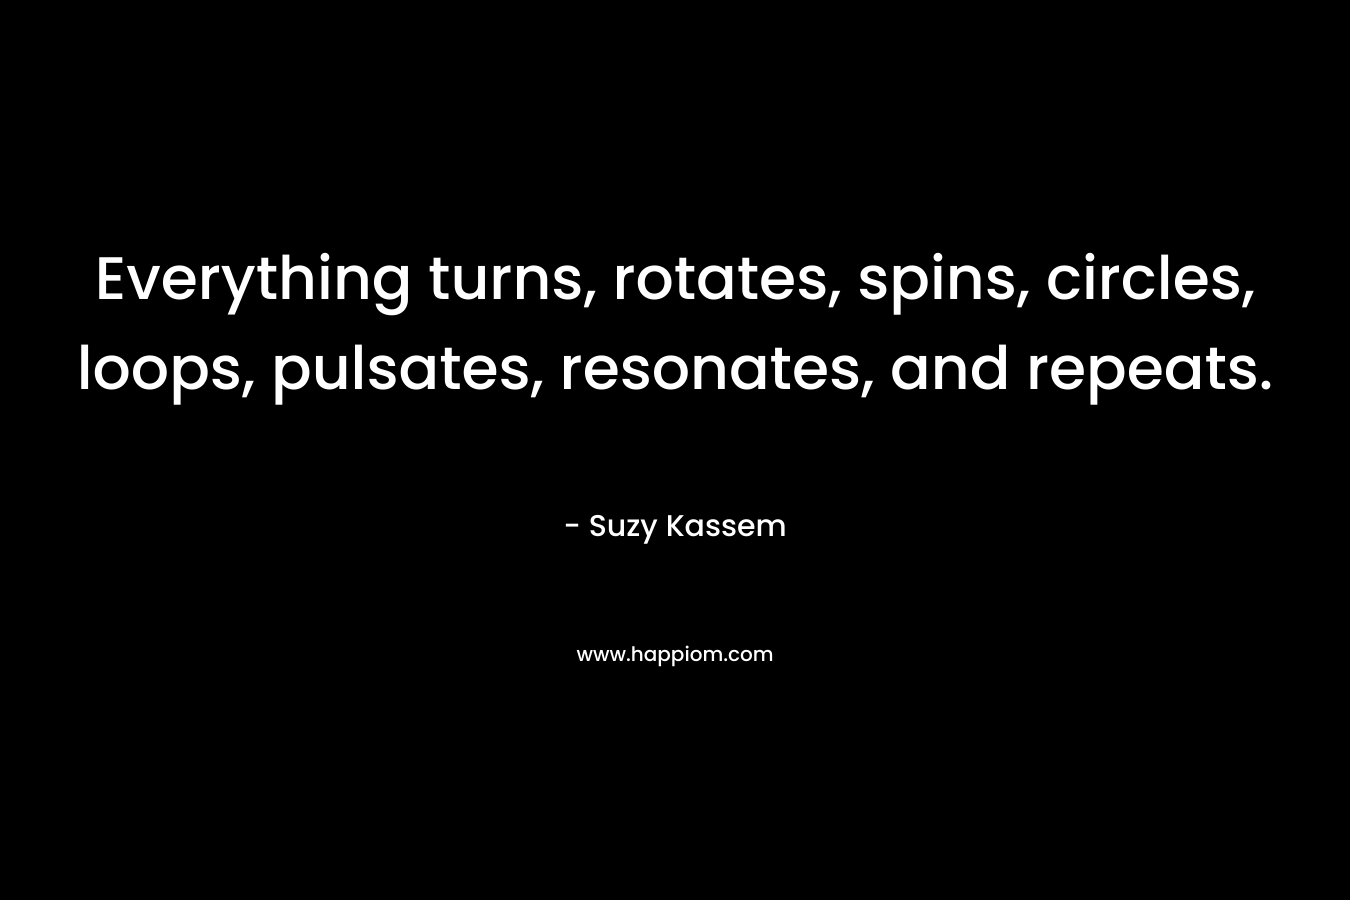 Everything turns, rotates, spins, circles, loops, pulsates, resonates, and repeats. – Suzy Kassem